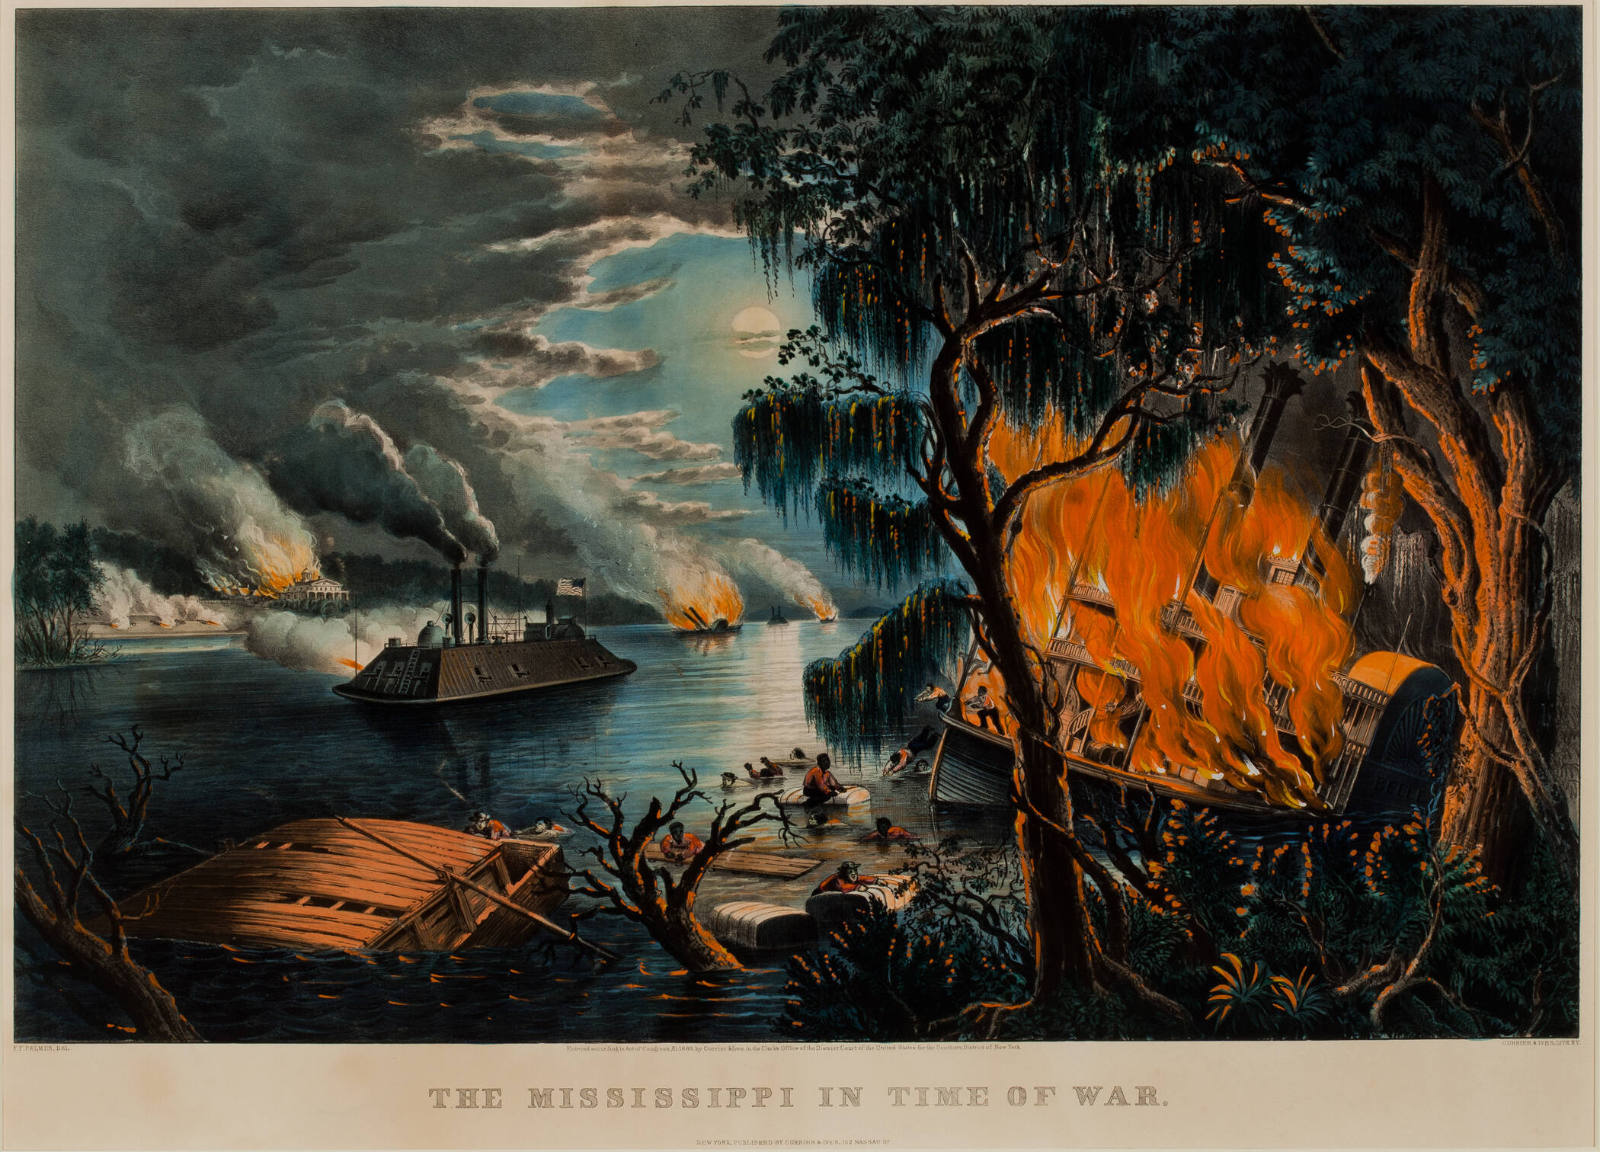 The Mississippi in Time of War